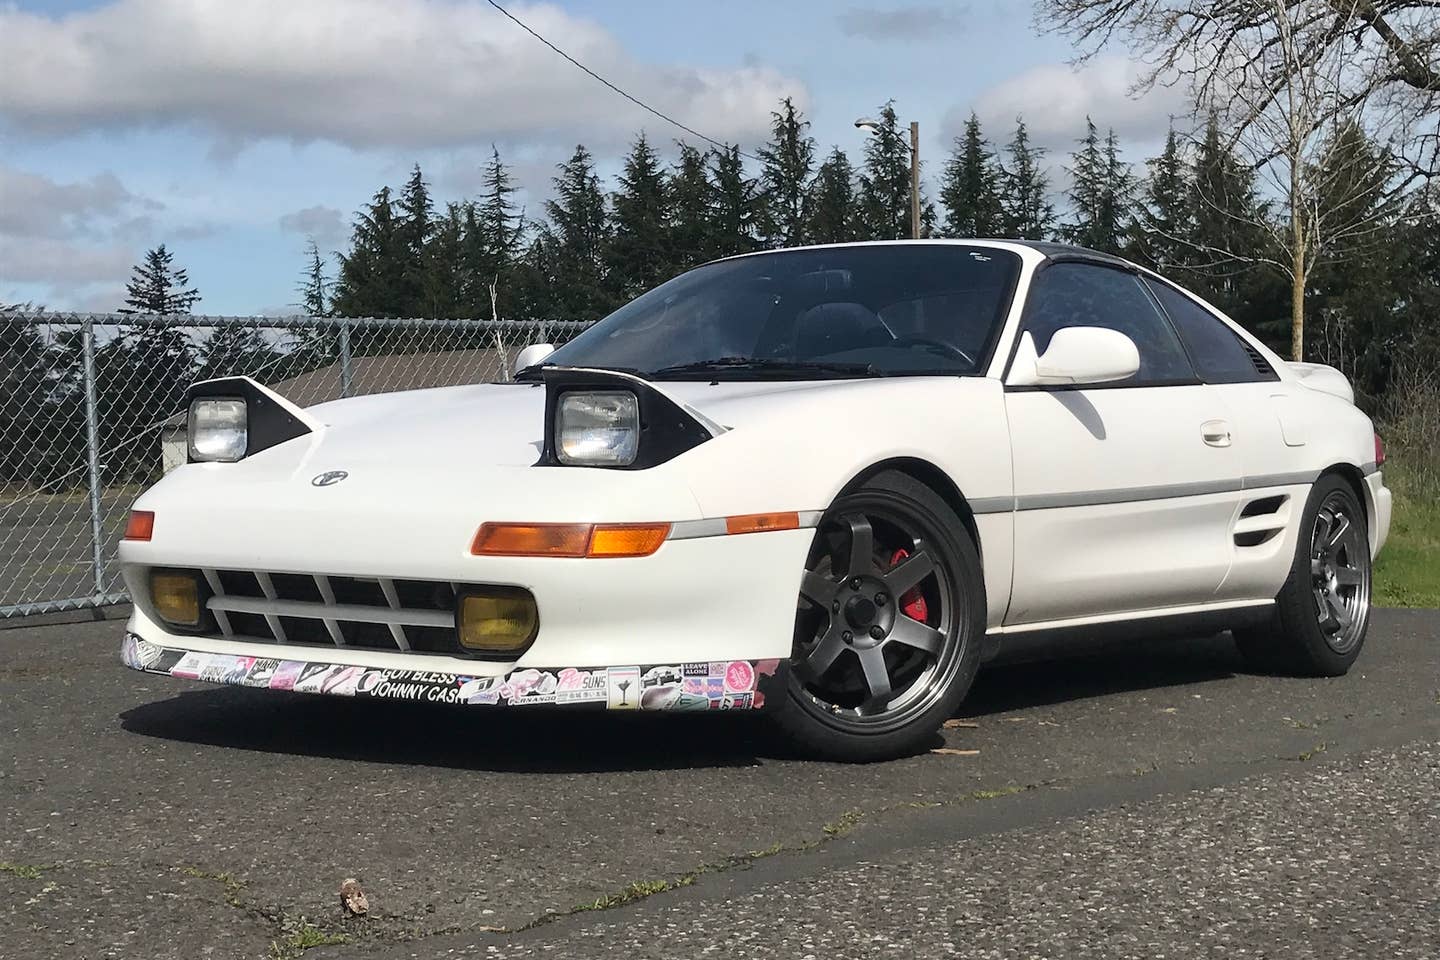 1991 Toyota MR2 Turbo in white, viewed from the front three-quarter angle